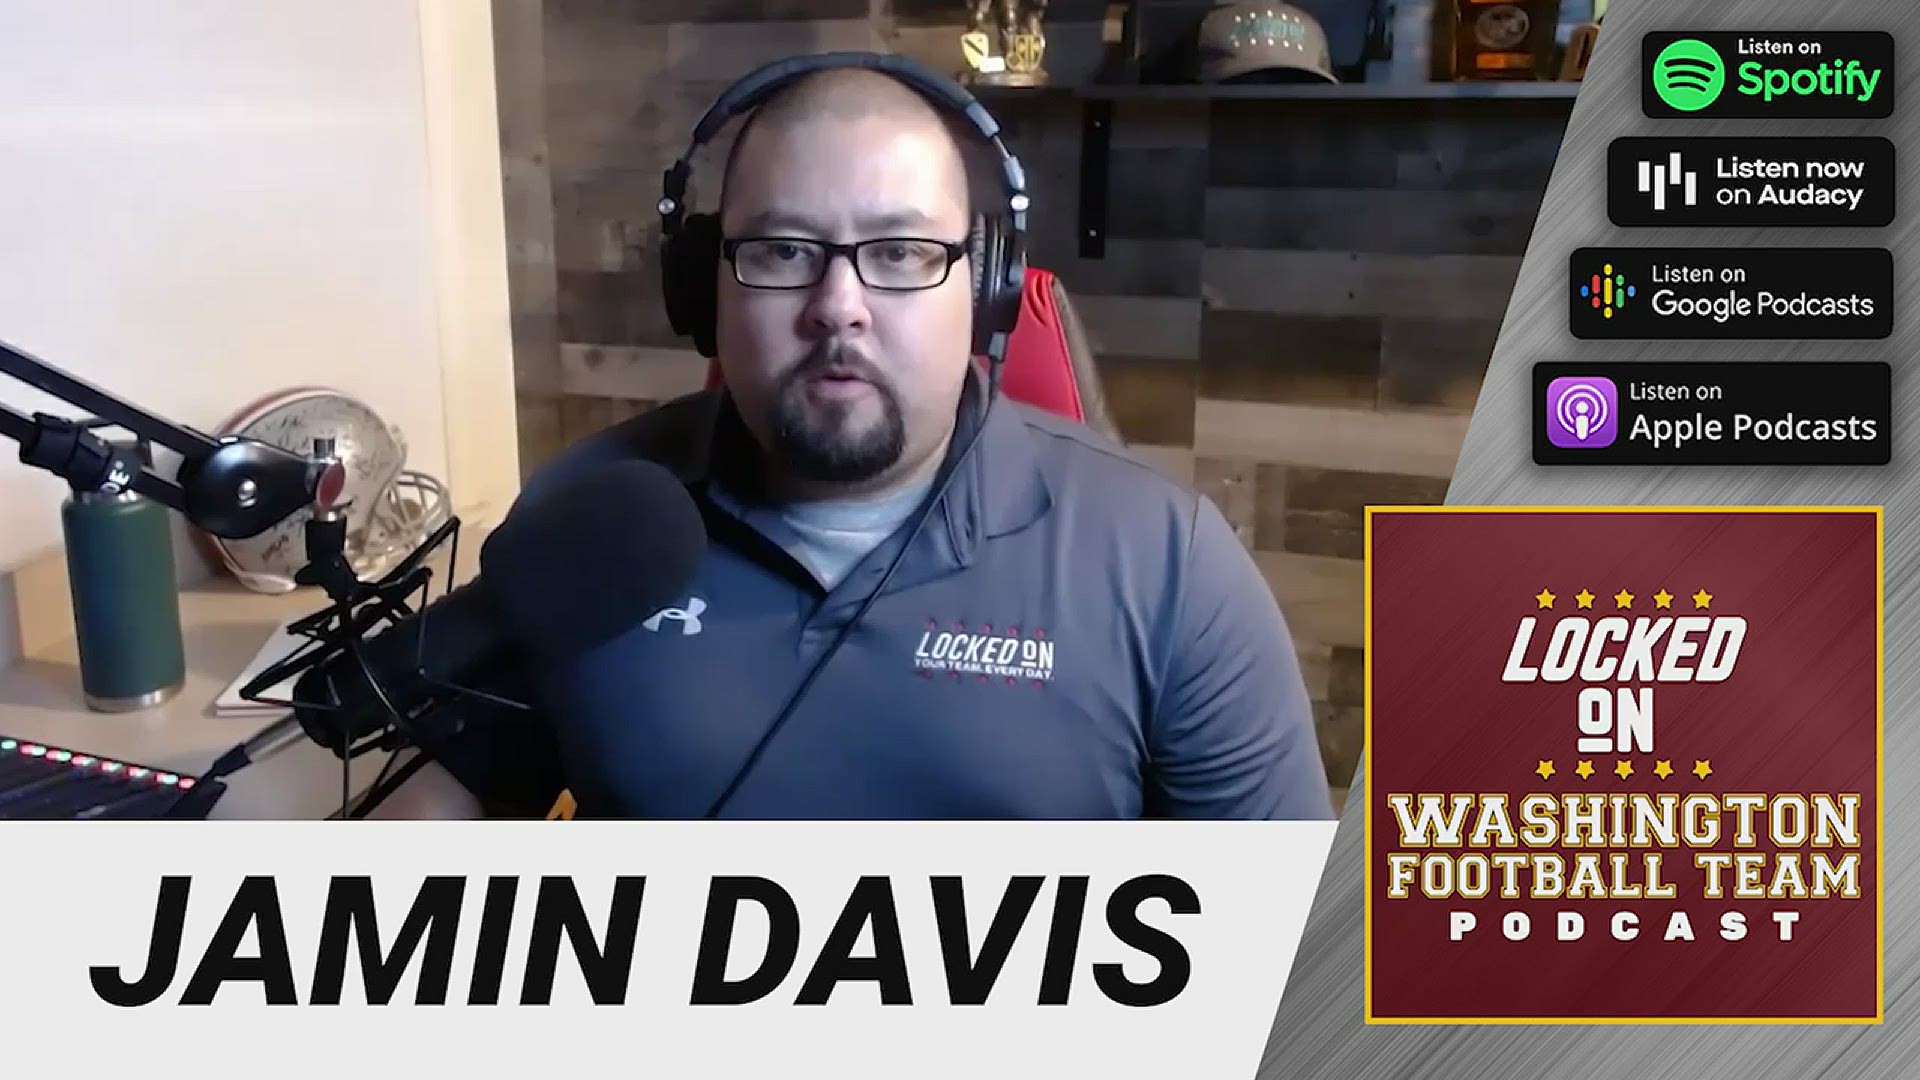 The Locked On team reacts to Jamin Davis being selected by the Washington Football Team in the 2021 NFL draft.